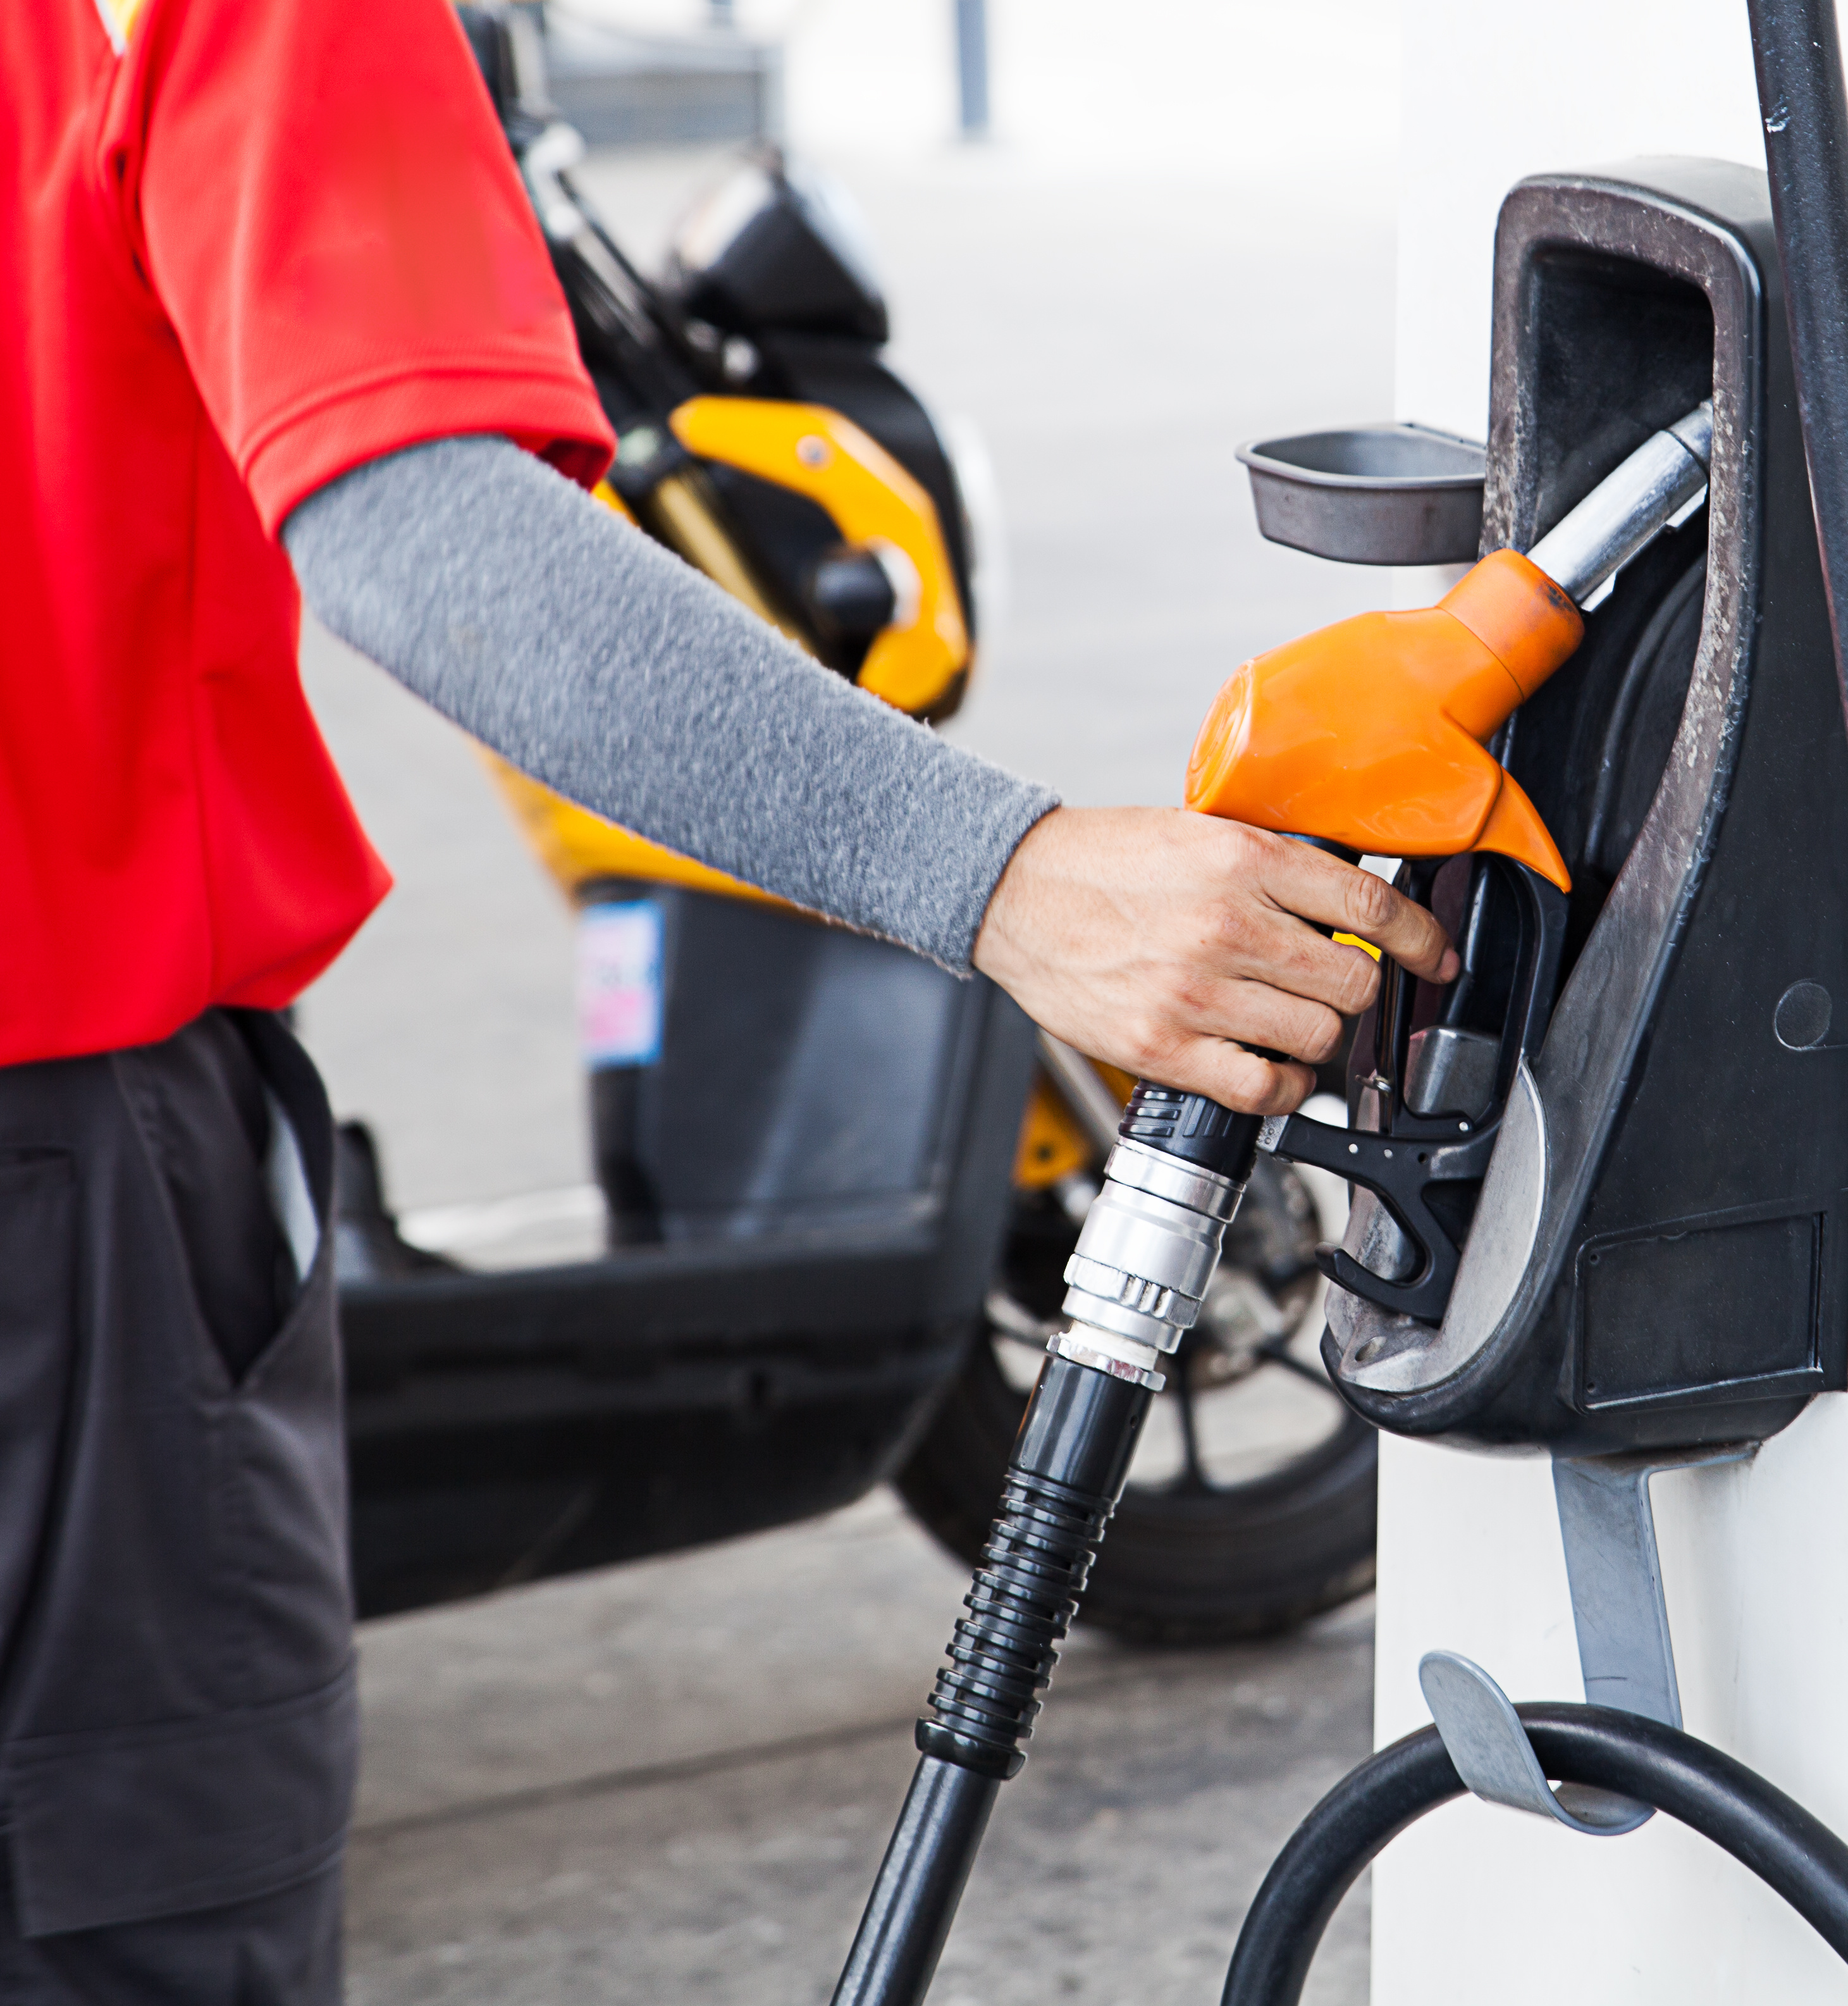 RPA can automate basic tasks like gasoline retailing